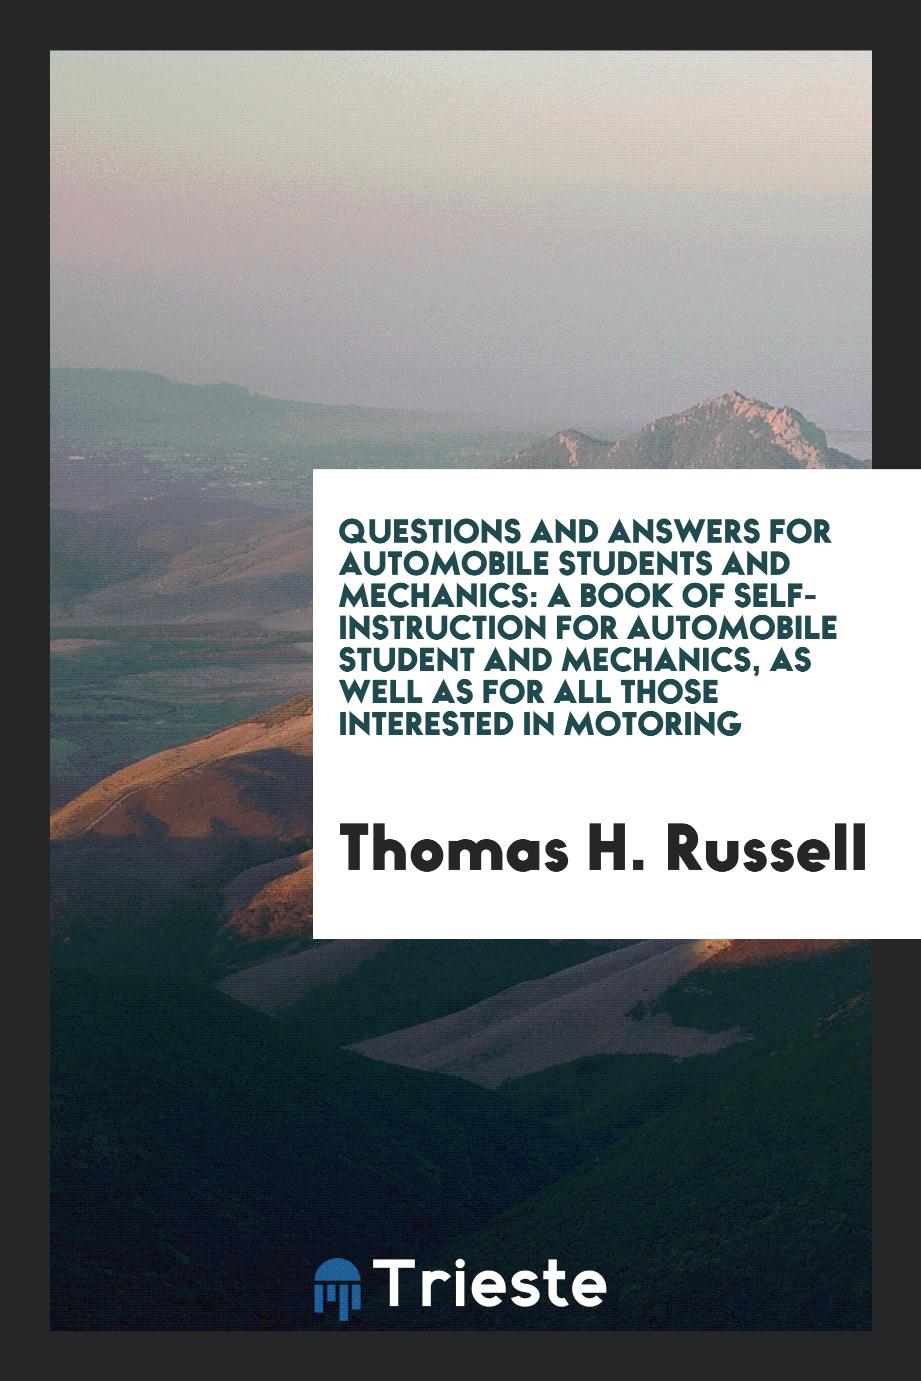 Questions and Answers for Automobile Students and Mechanics: A Book of Self-Instruction for Automobile Student and Mechanics, as Well as for All Those Interested in Motoring